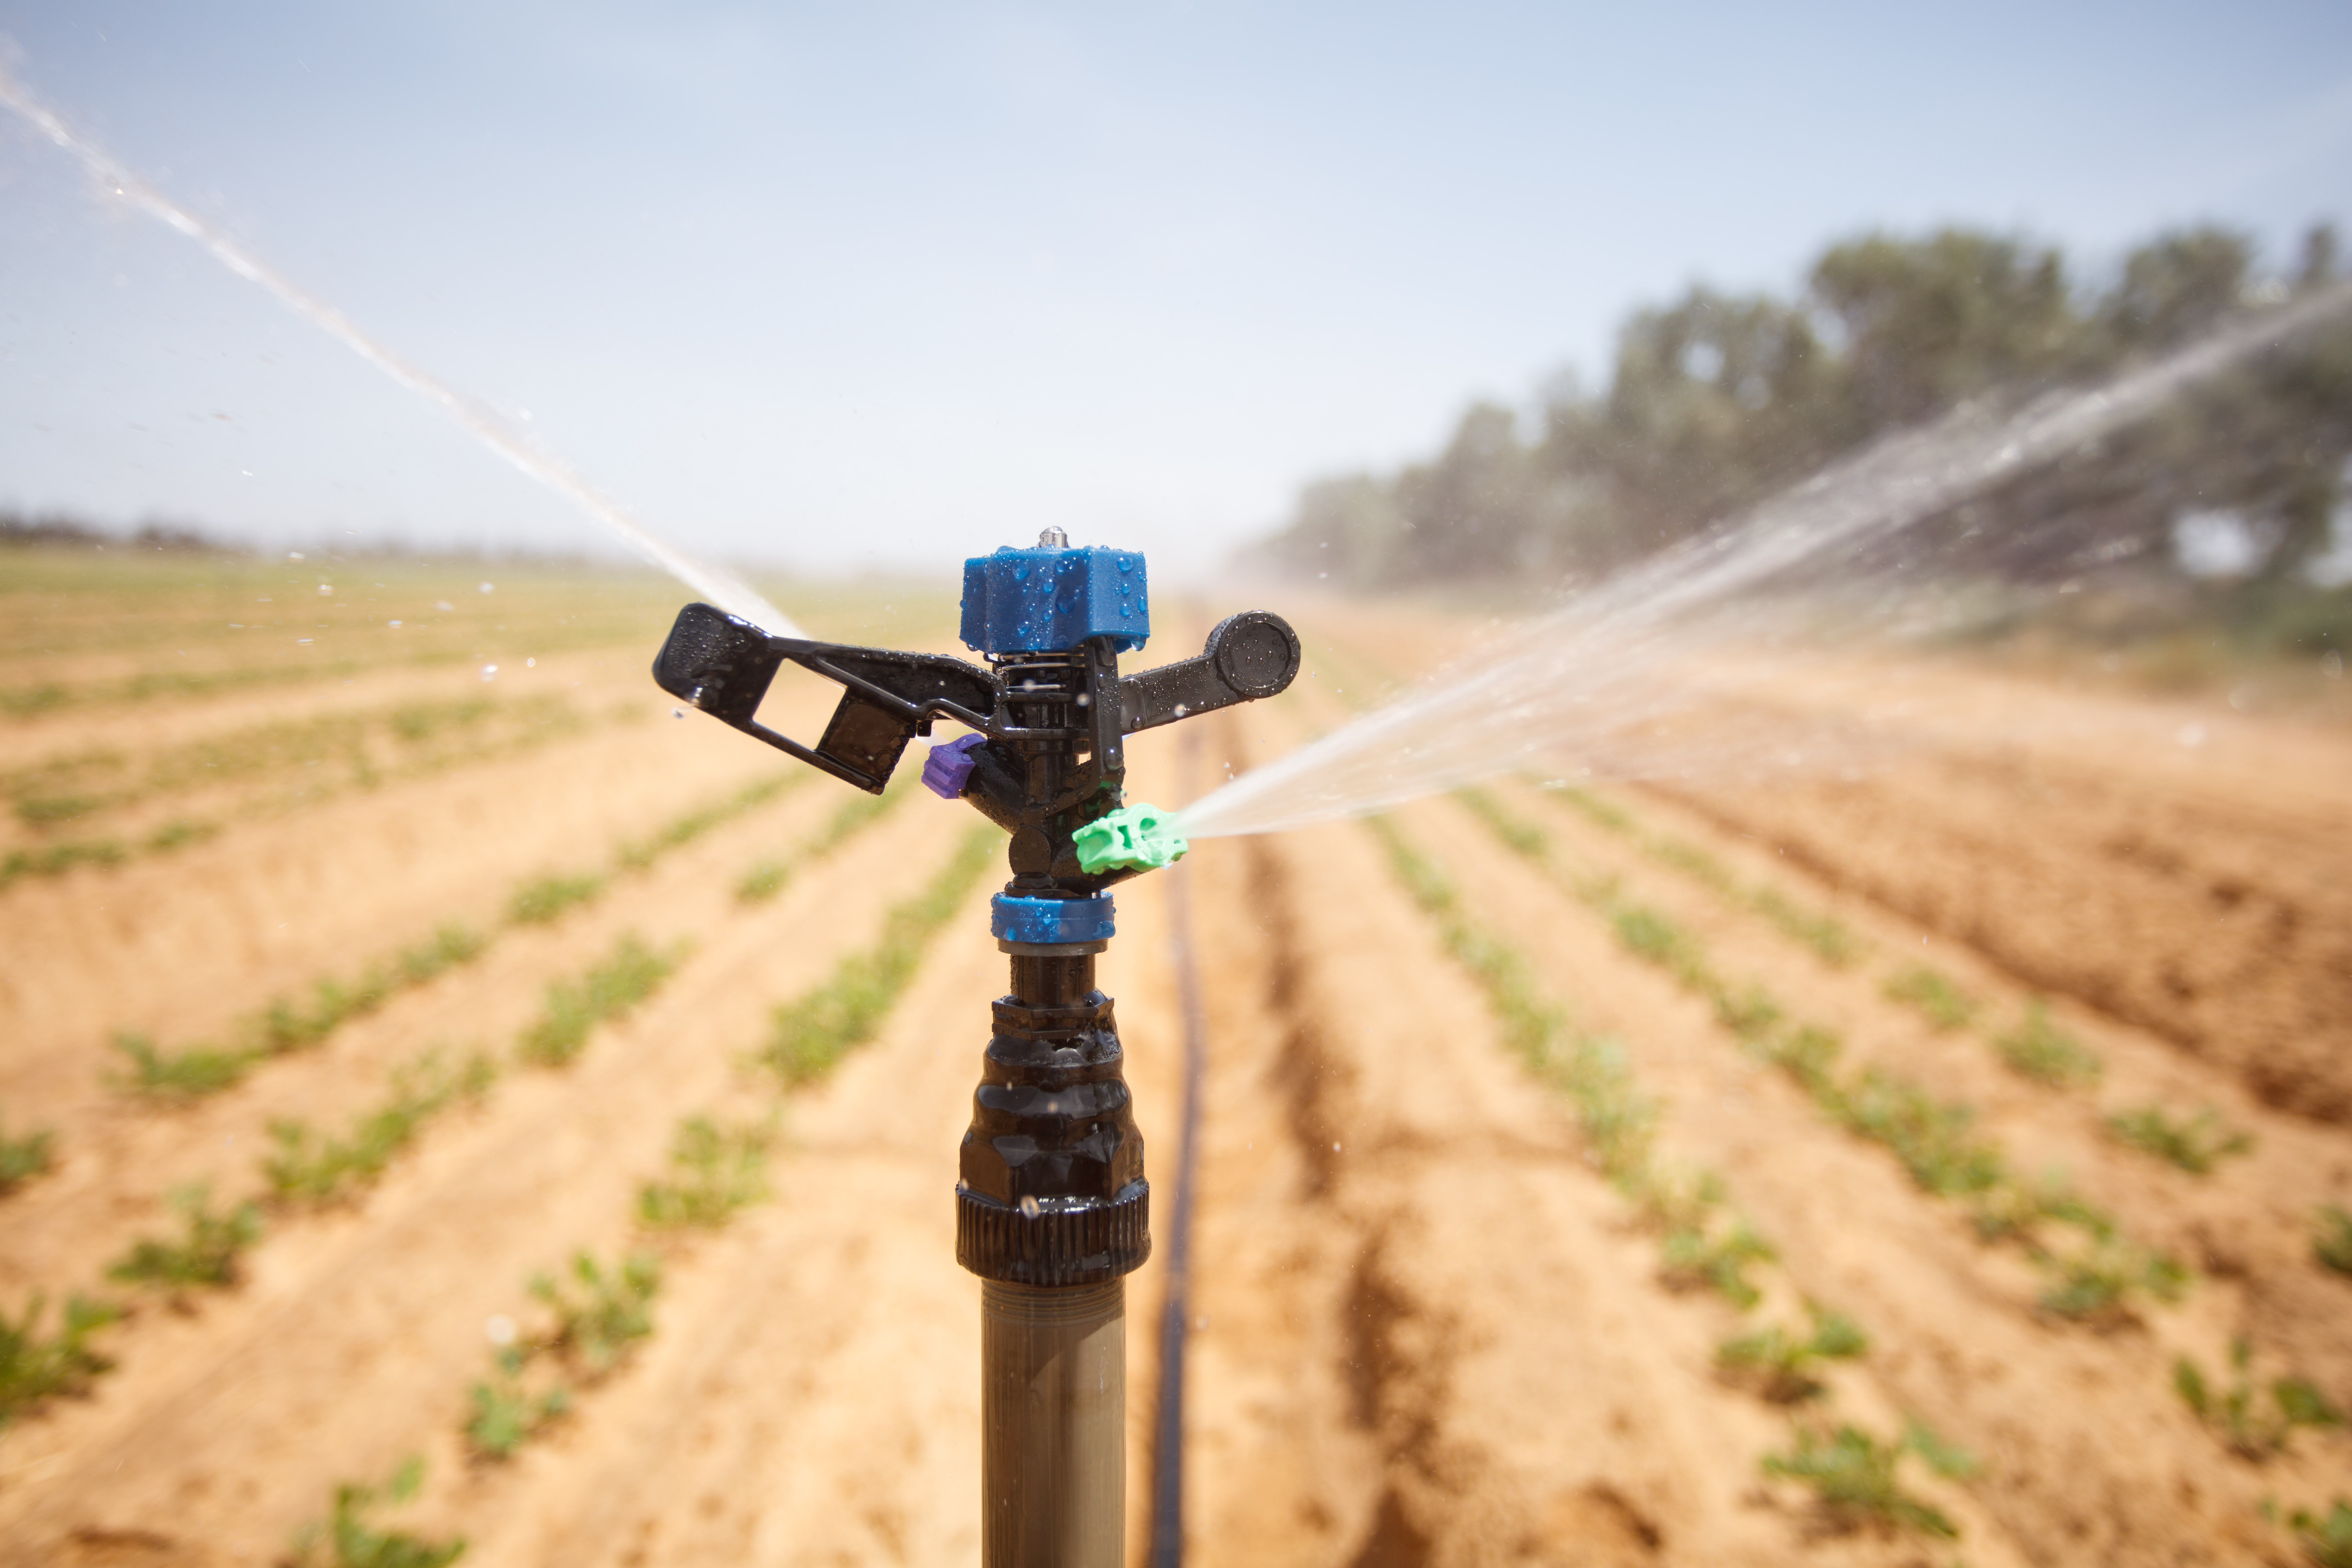 Localised irrigation or sprinkler irrigation : How to choose on the basis of agronomic criteria?